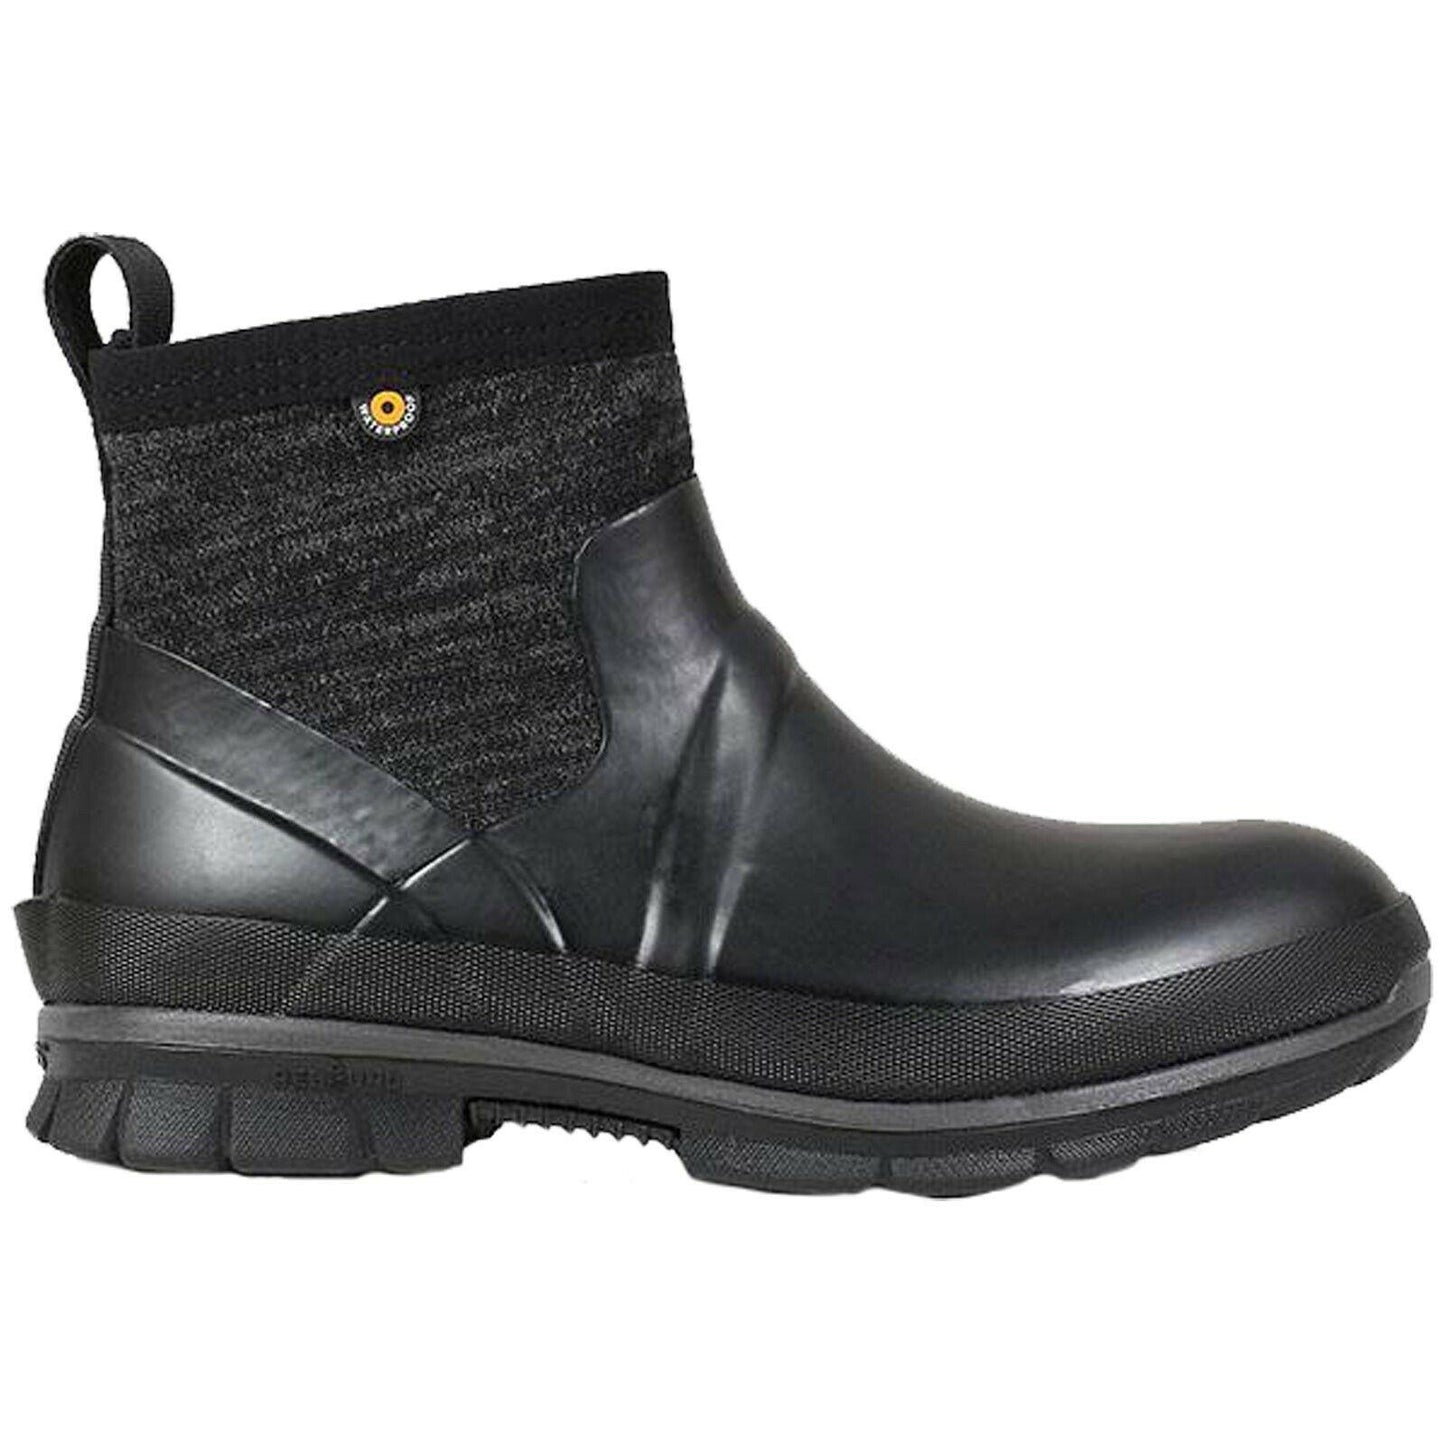 Ladies BOGS Crandall Low Black Multi Insulated Ankle Boots Wellies Boots 72420